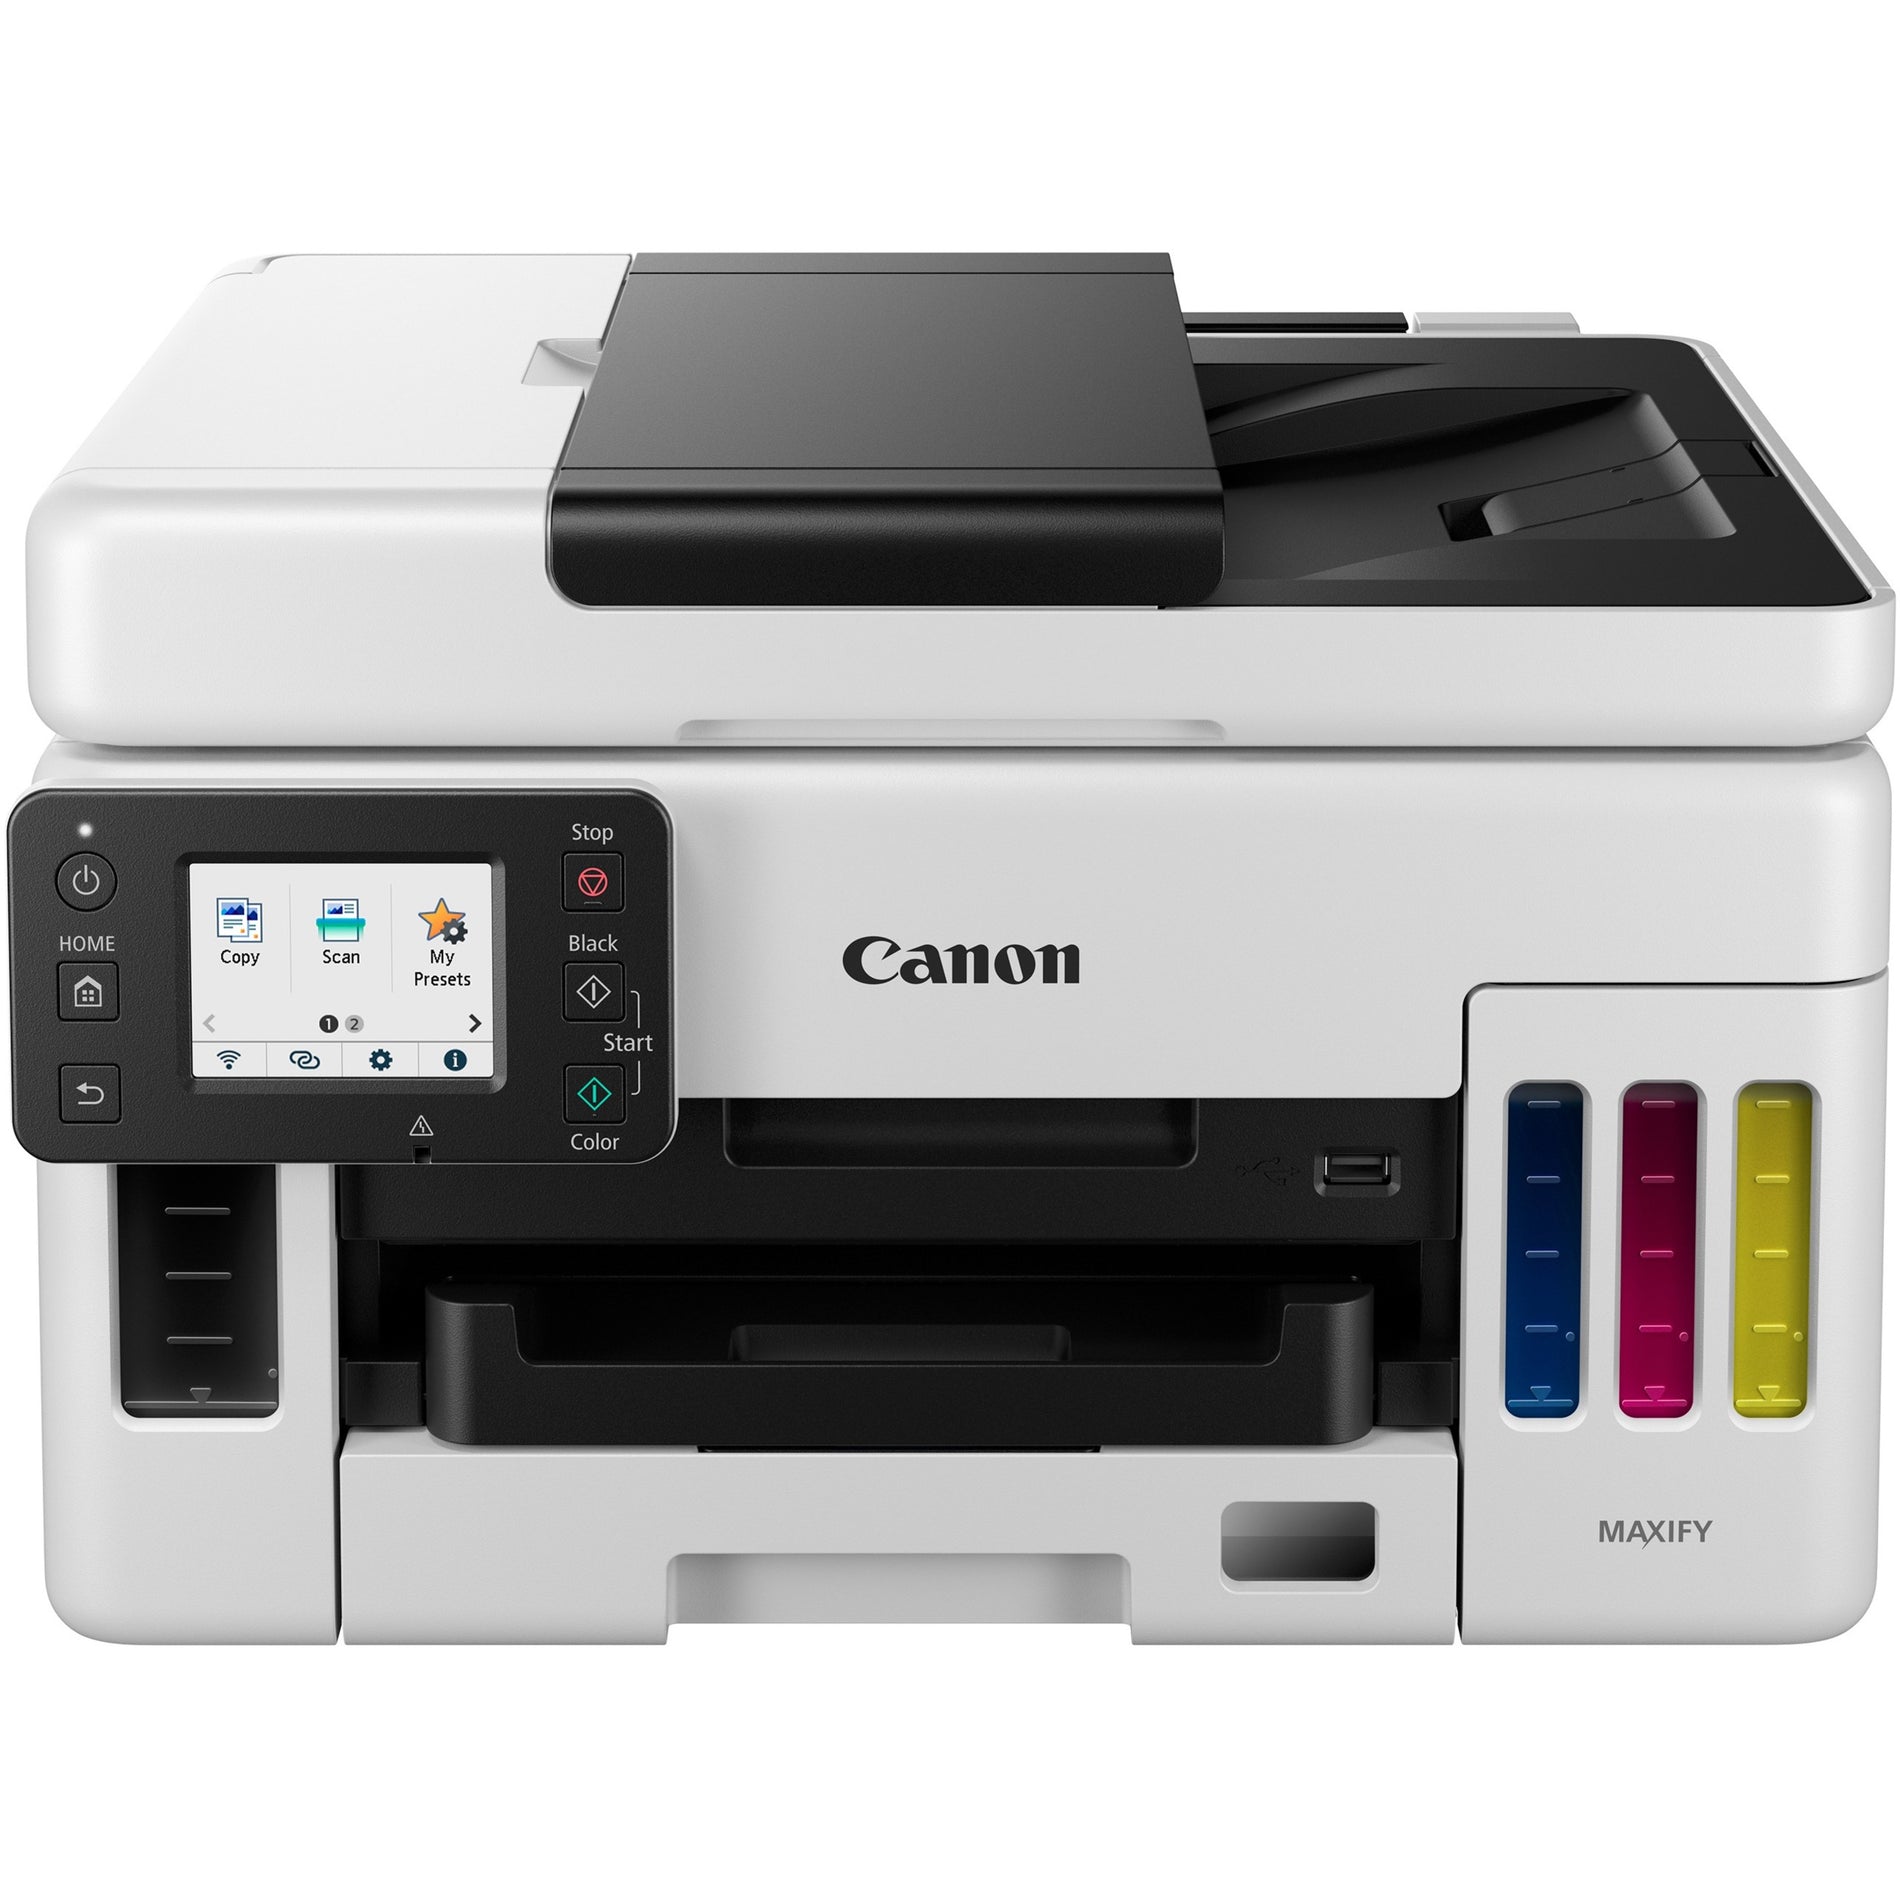 Canon 4470C037 MAXIFY GX6021 Wireless MegaTank All-in-One Printer, Color, Flatbed Scanner, 3 Year Warranty, 45000 Duty Cycle, Energy Star, USB, 2.70" Touchscreen LCD, Inkjet Multifunction Printer